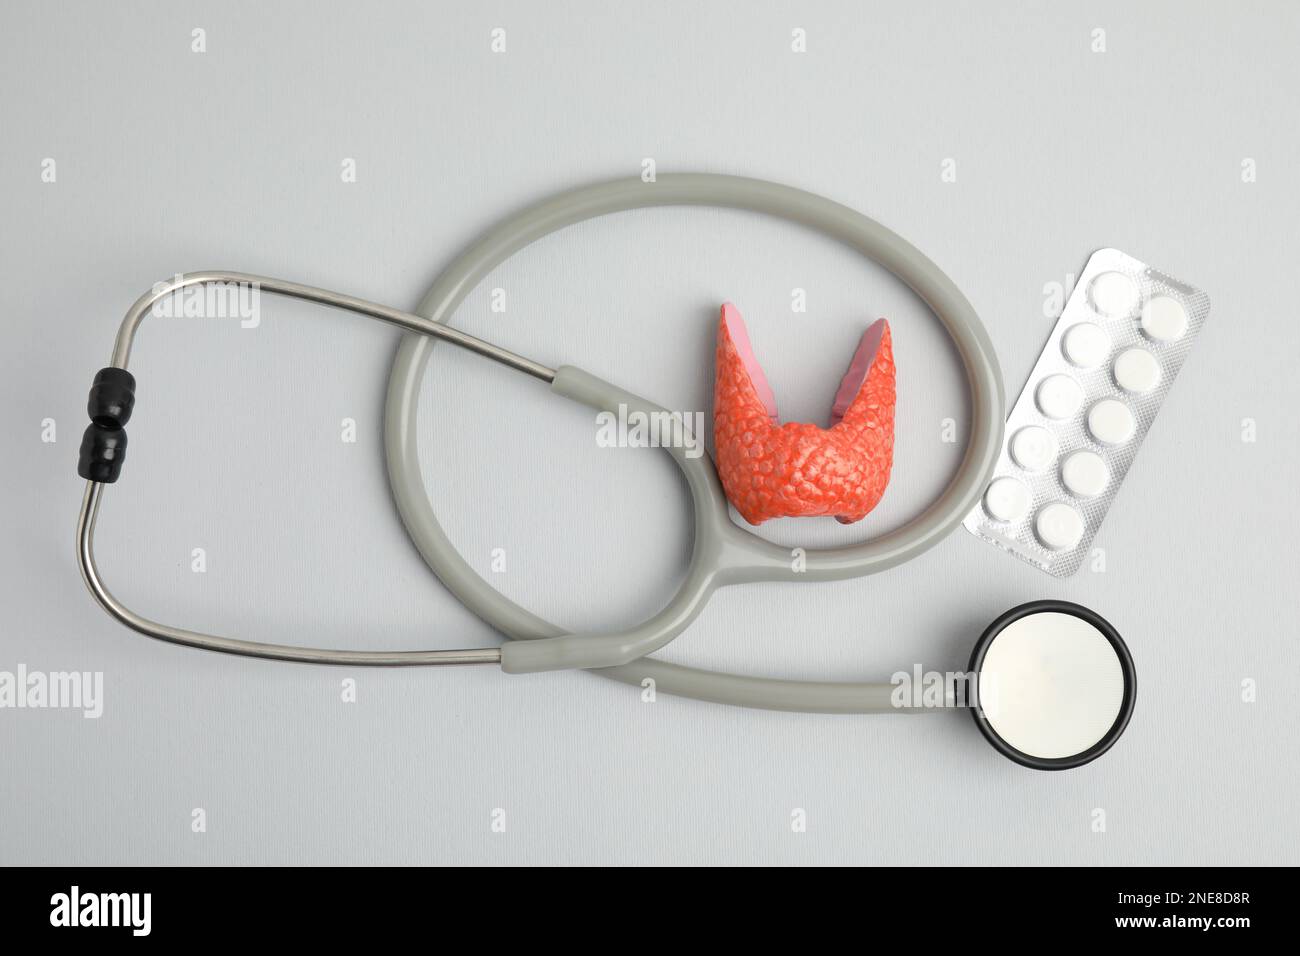 Plastic model of healthy thyroid, pills and stethoscope on grey background, flat lay Stock Photo